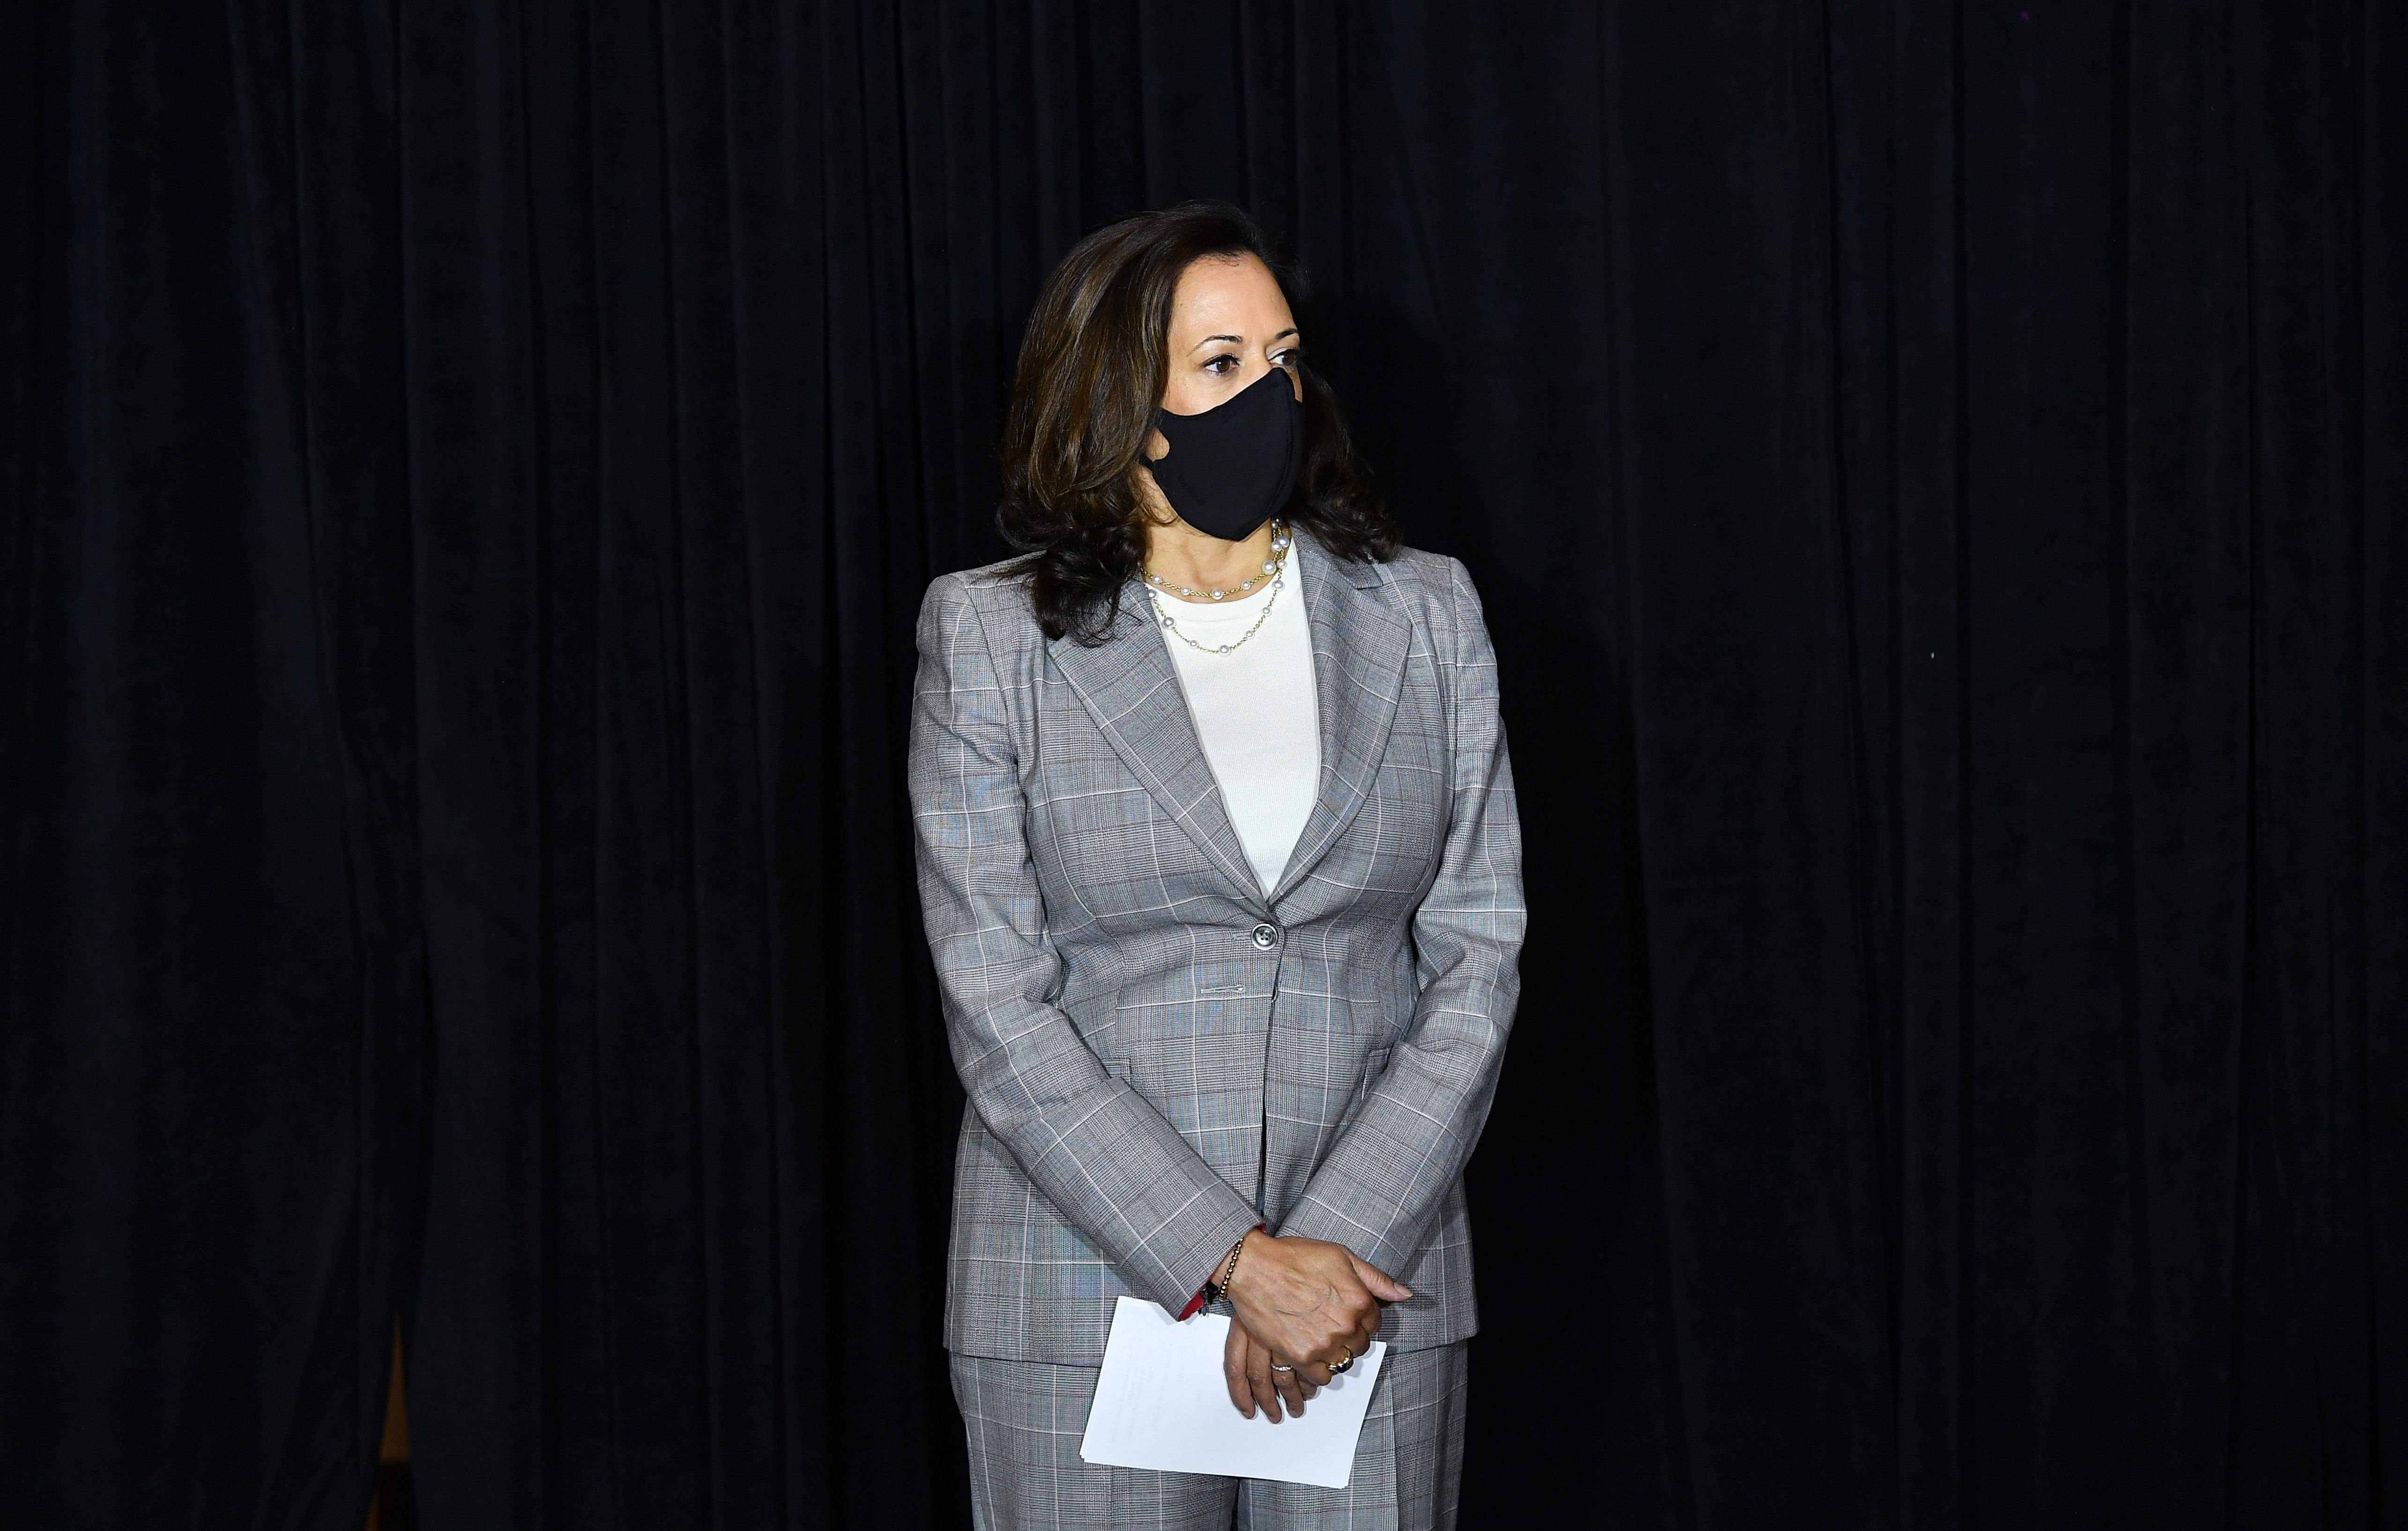 Kamala Harris, the Democratic vice presidential nominee, attends a press conference in Wilmington, Delaware, on August 13.